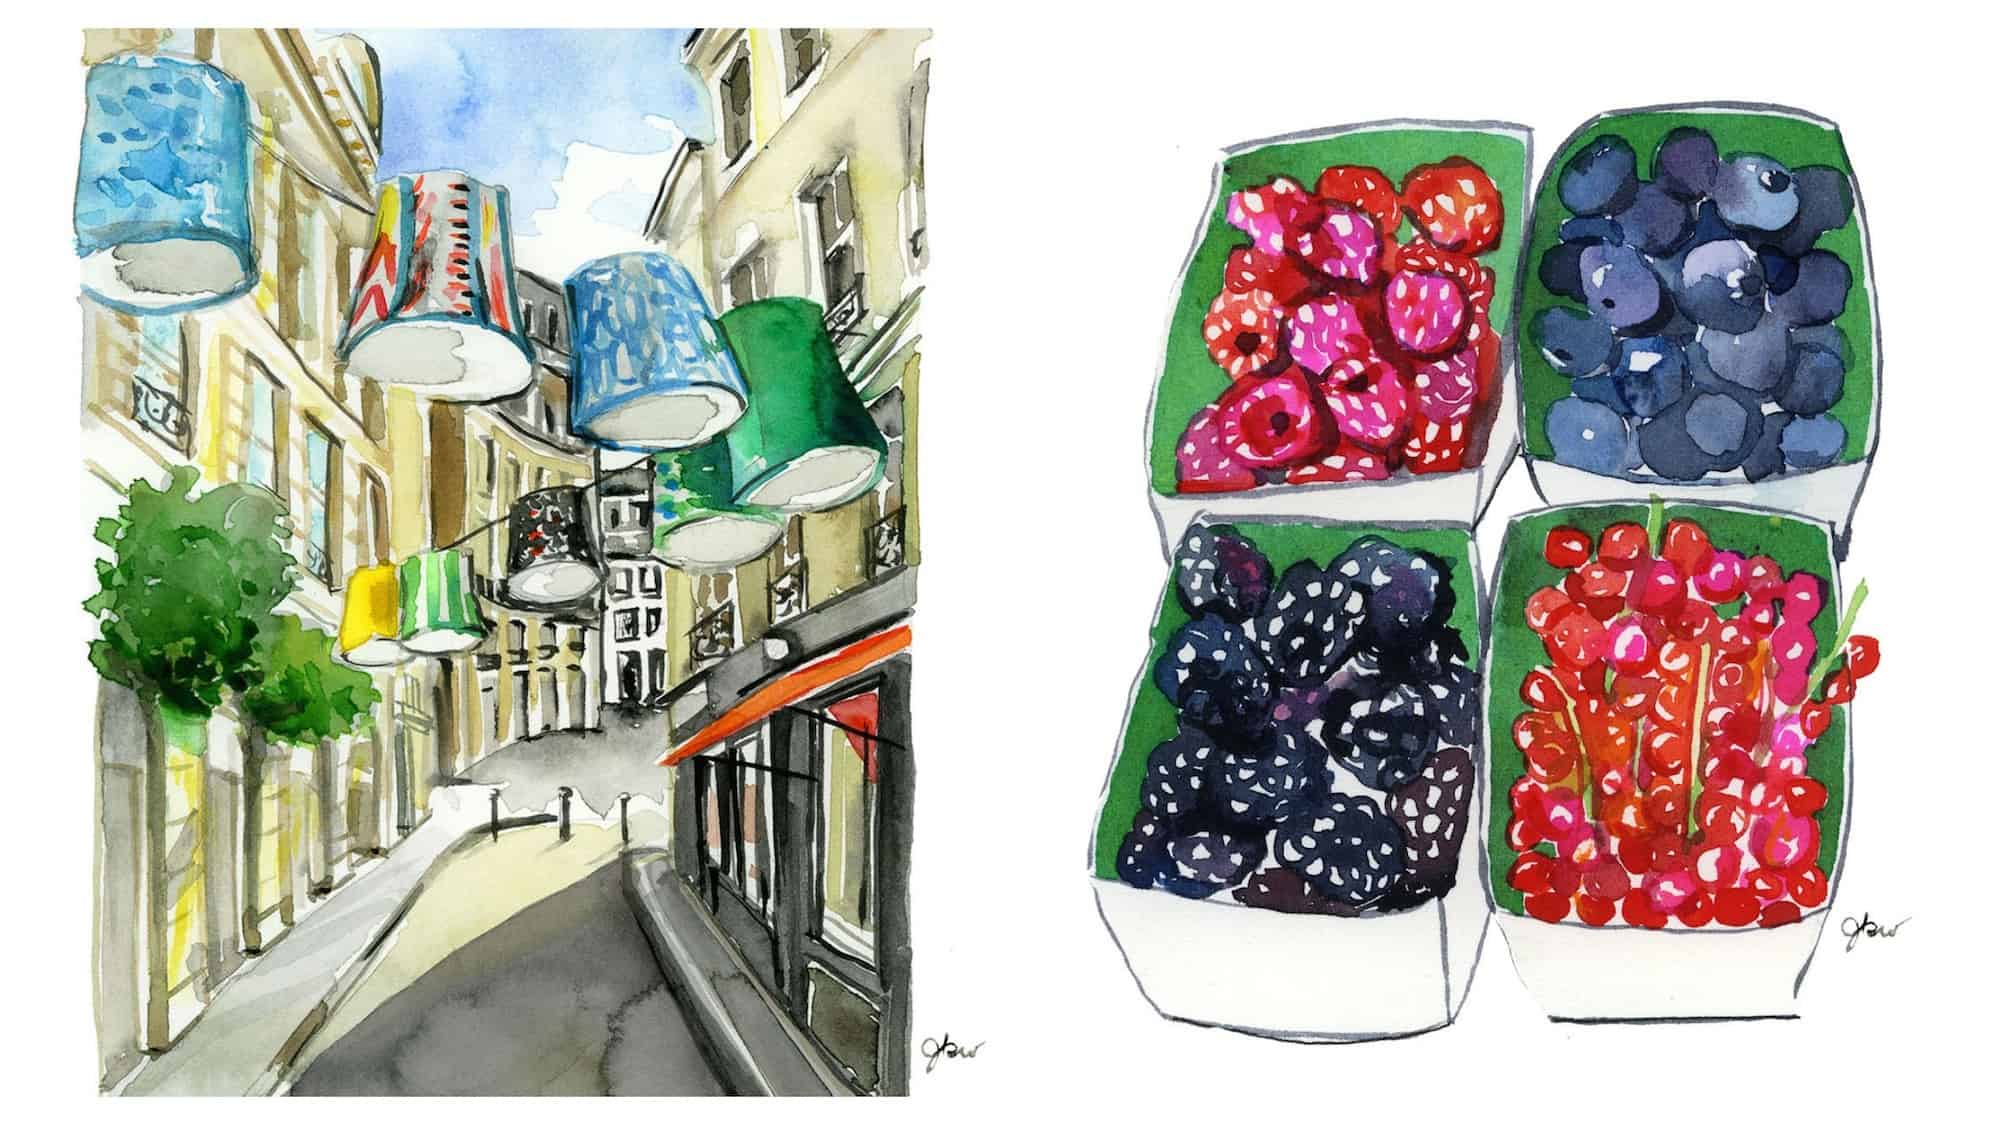 One of our favorite guidebooks to Paris, illustrated with beautiful pictures like the streets of Paris during Design Week (left) and fresh fruit at market stalls (right).